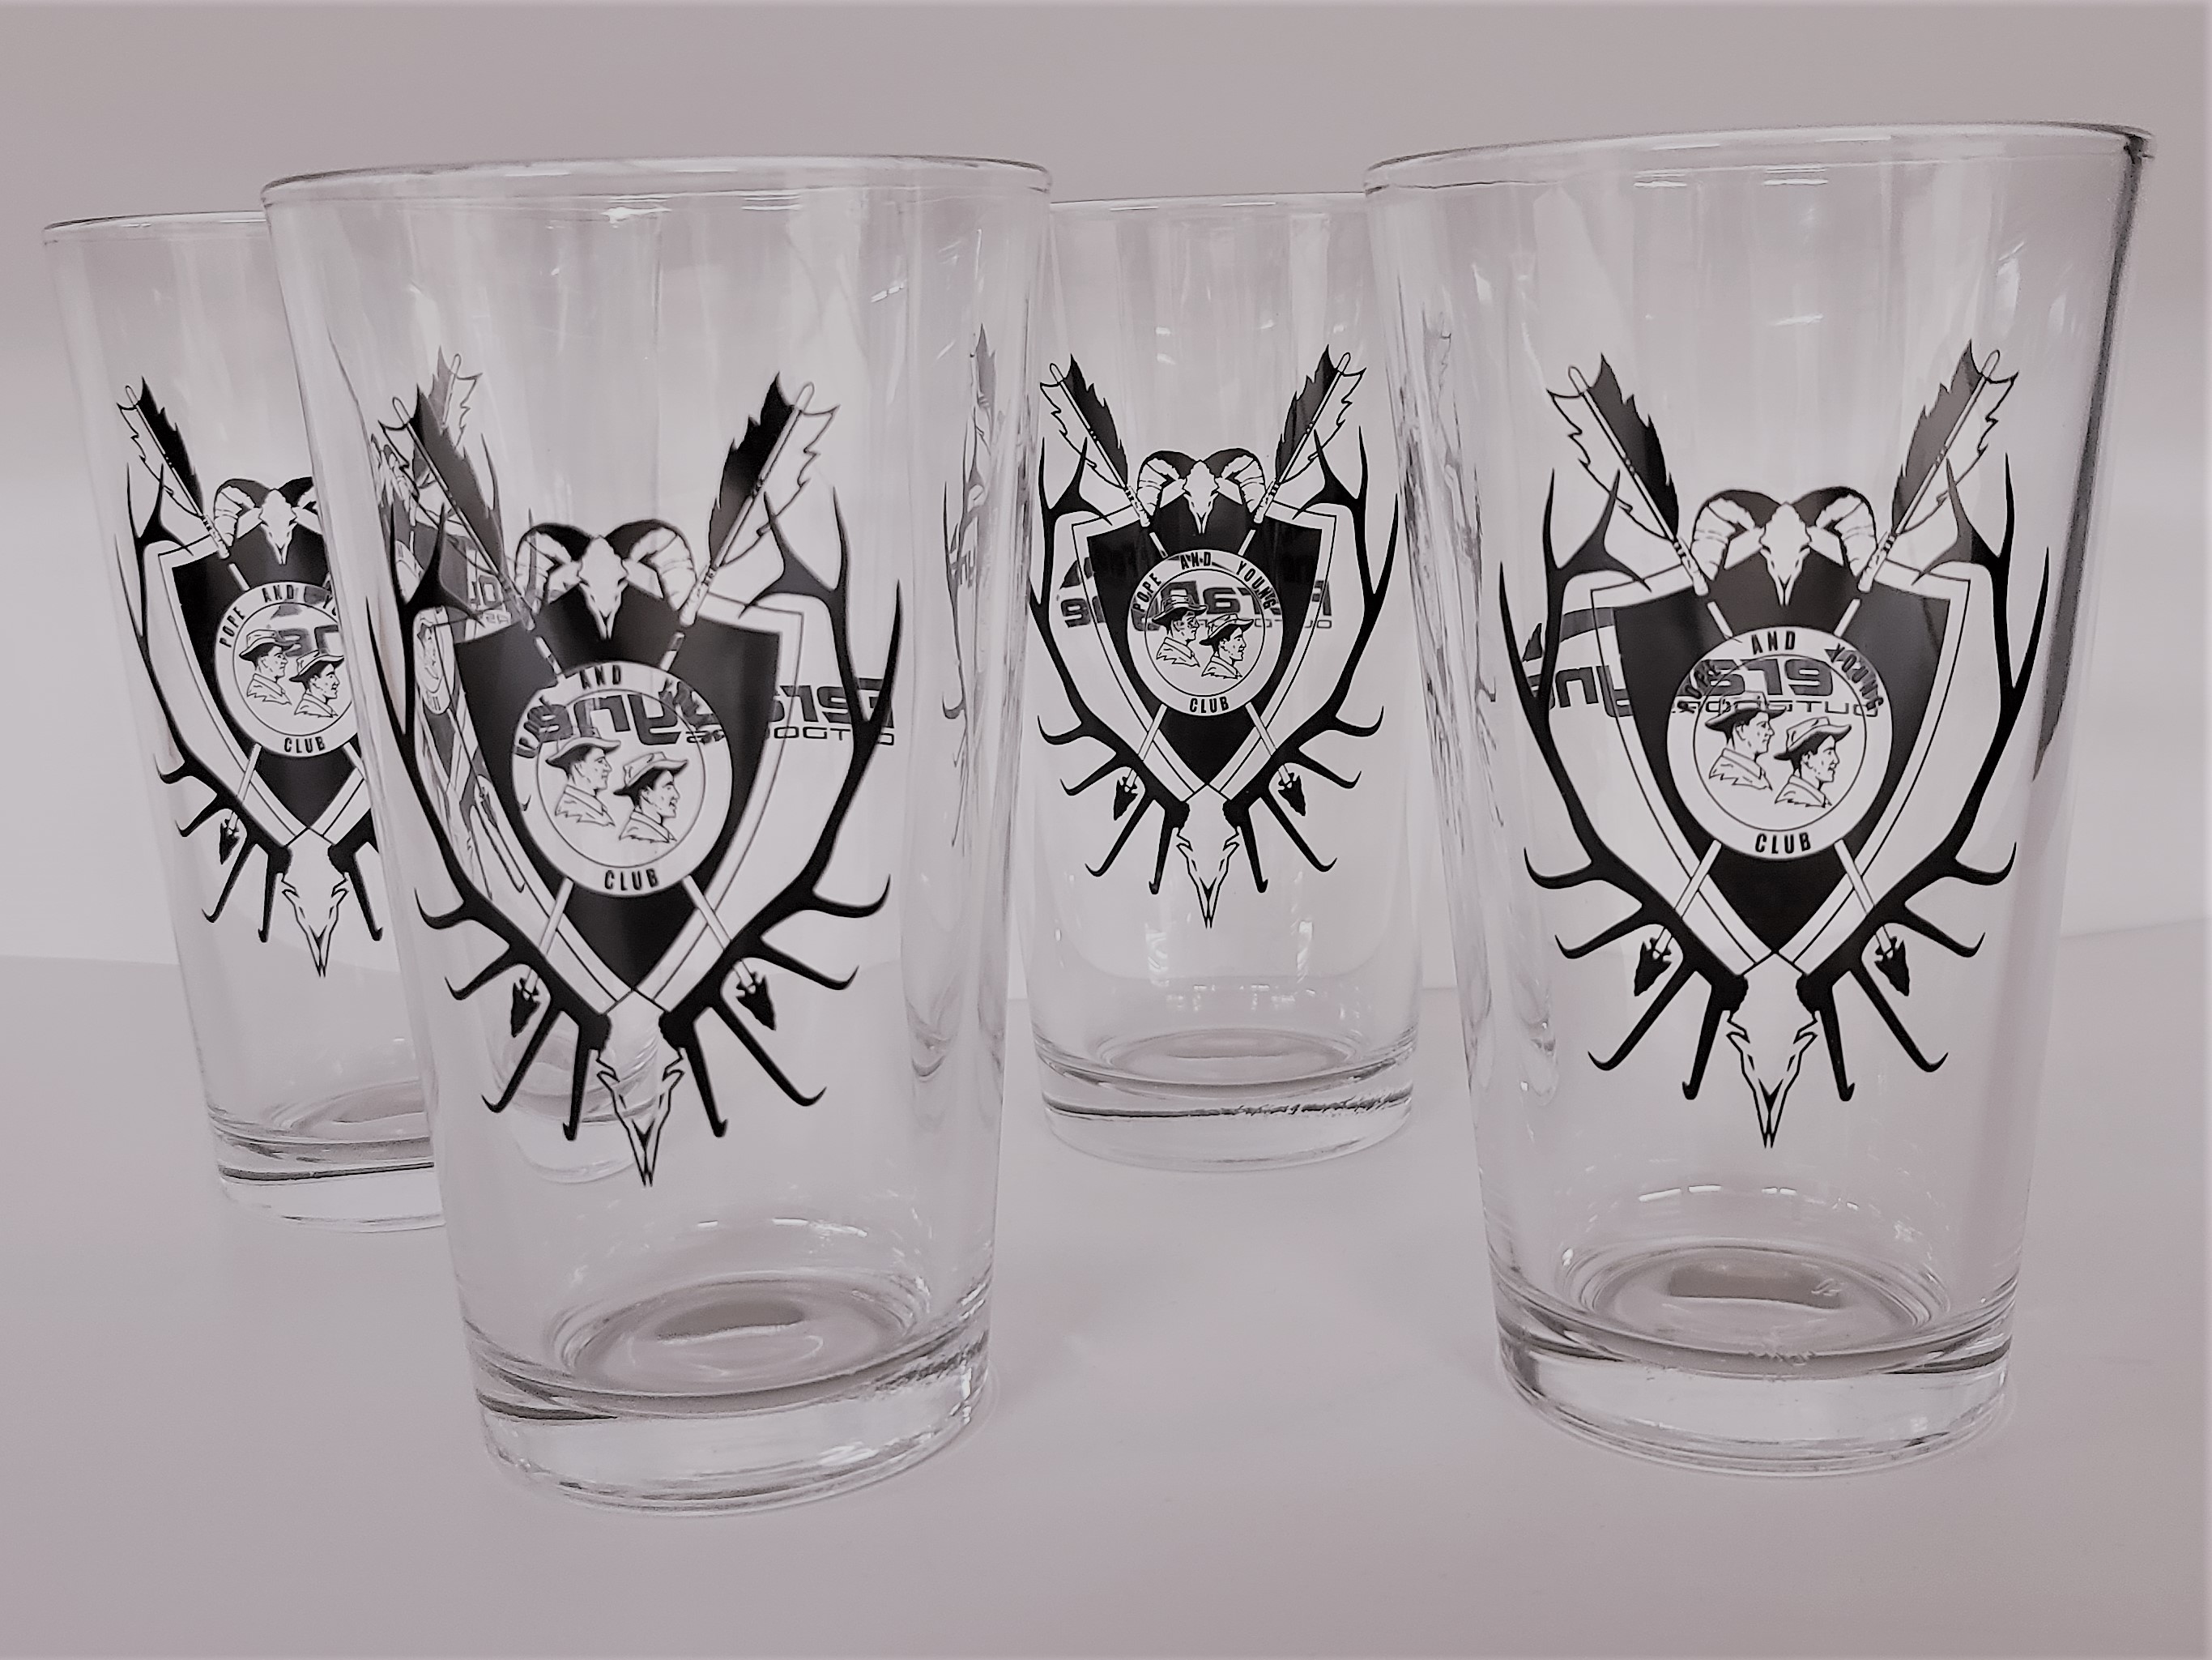 
Pope & Young Pint Glass Set of 6